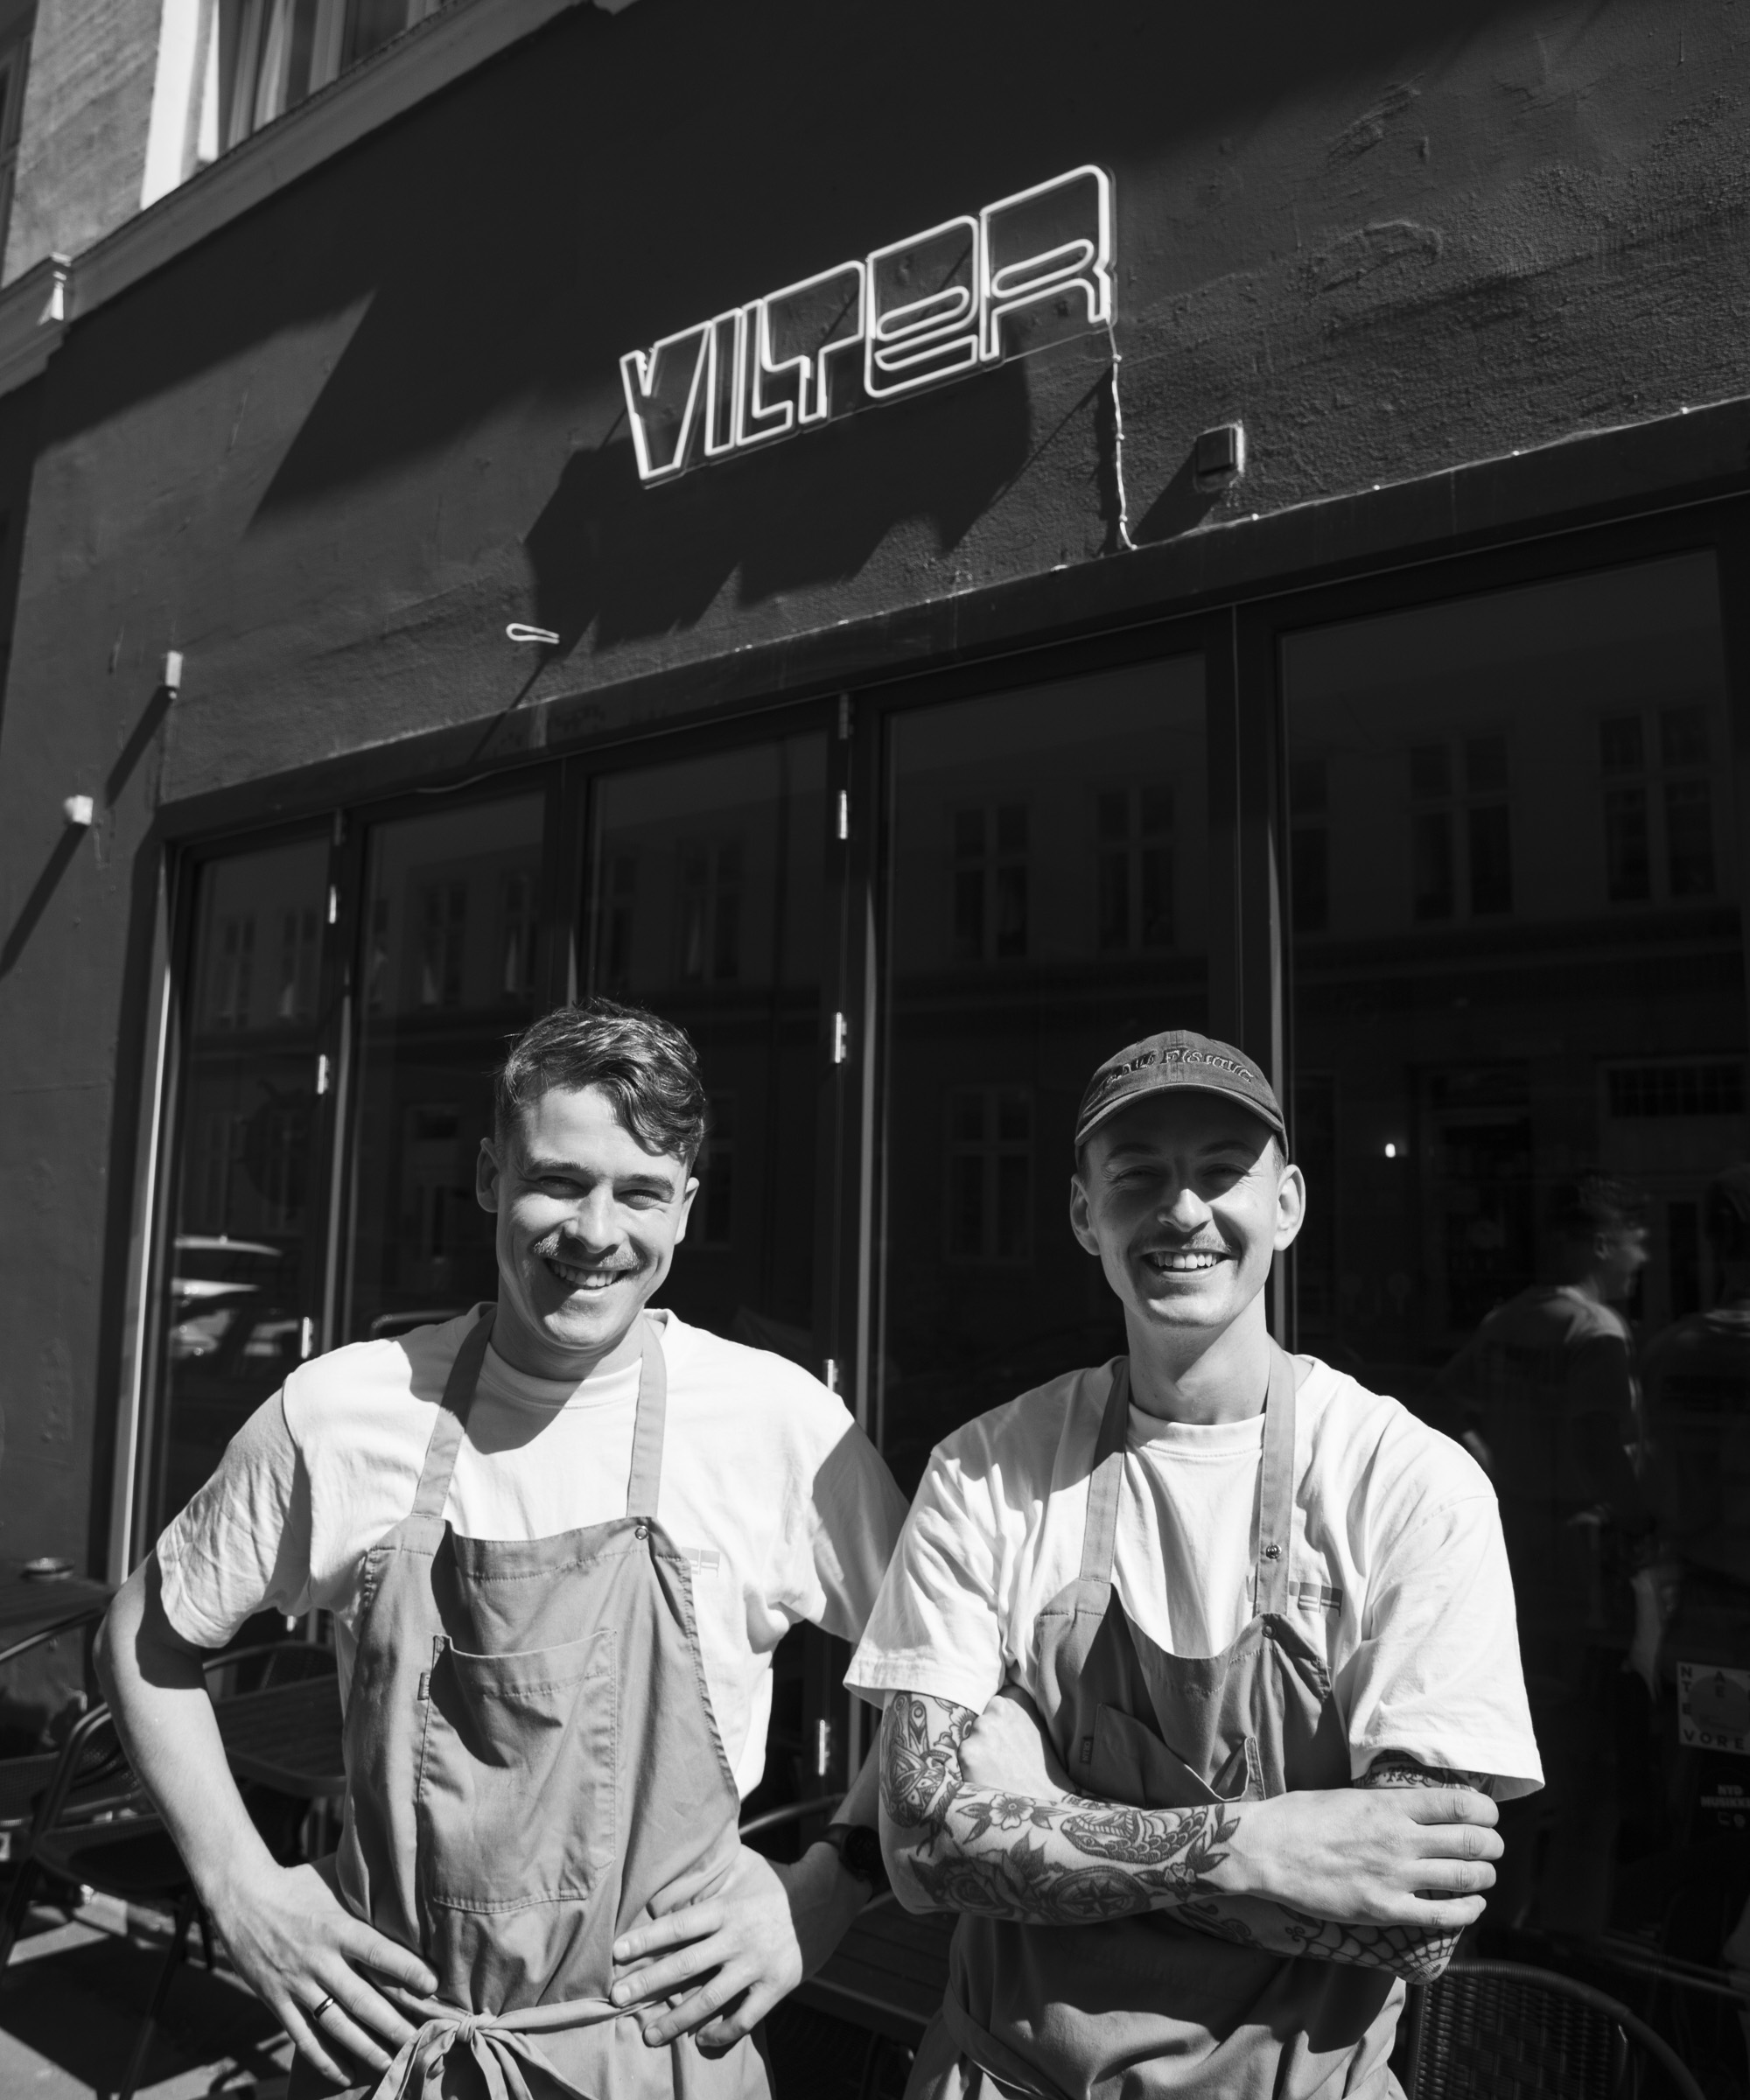 6-course menu at Vilter – This wild card on a side street in Vesterbro has been recommended by Politiken as a new restaurant that’s not to be missed